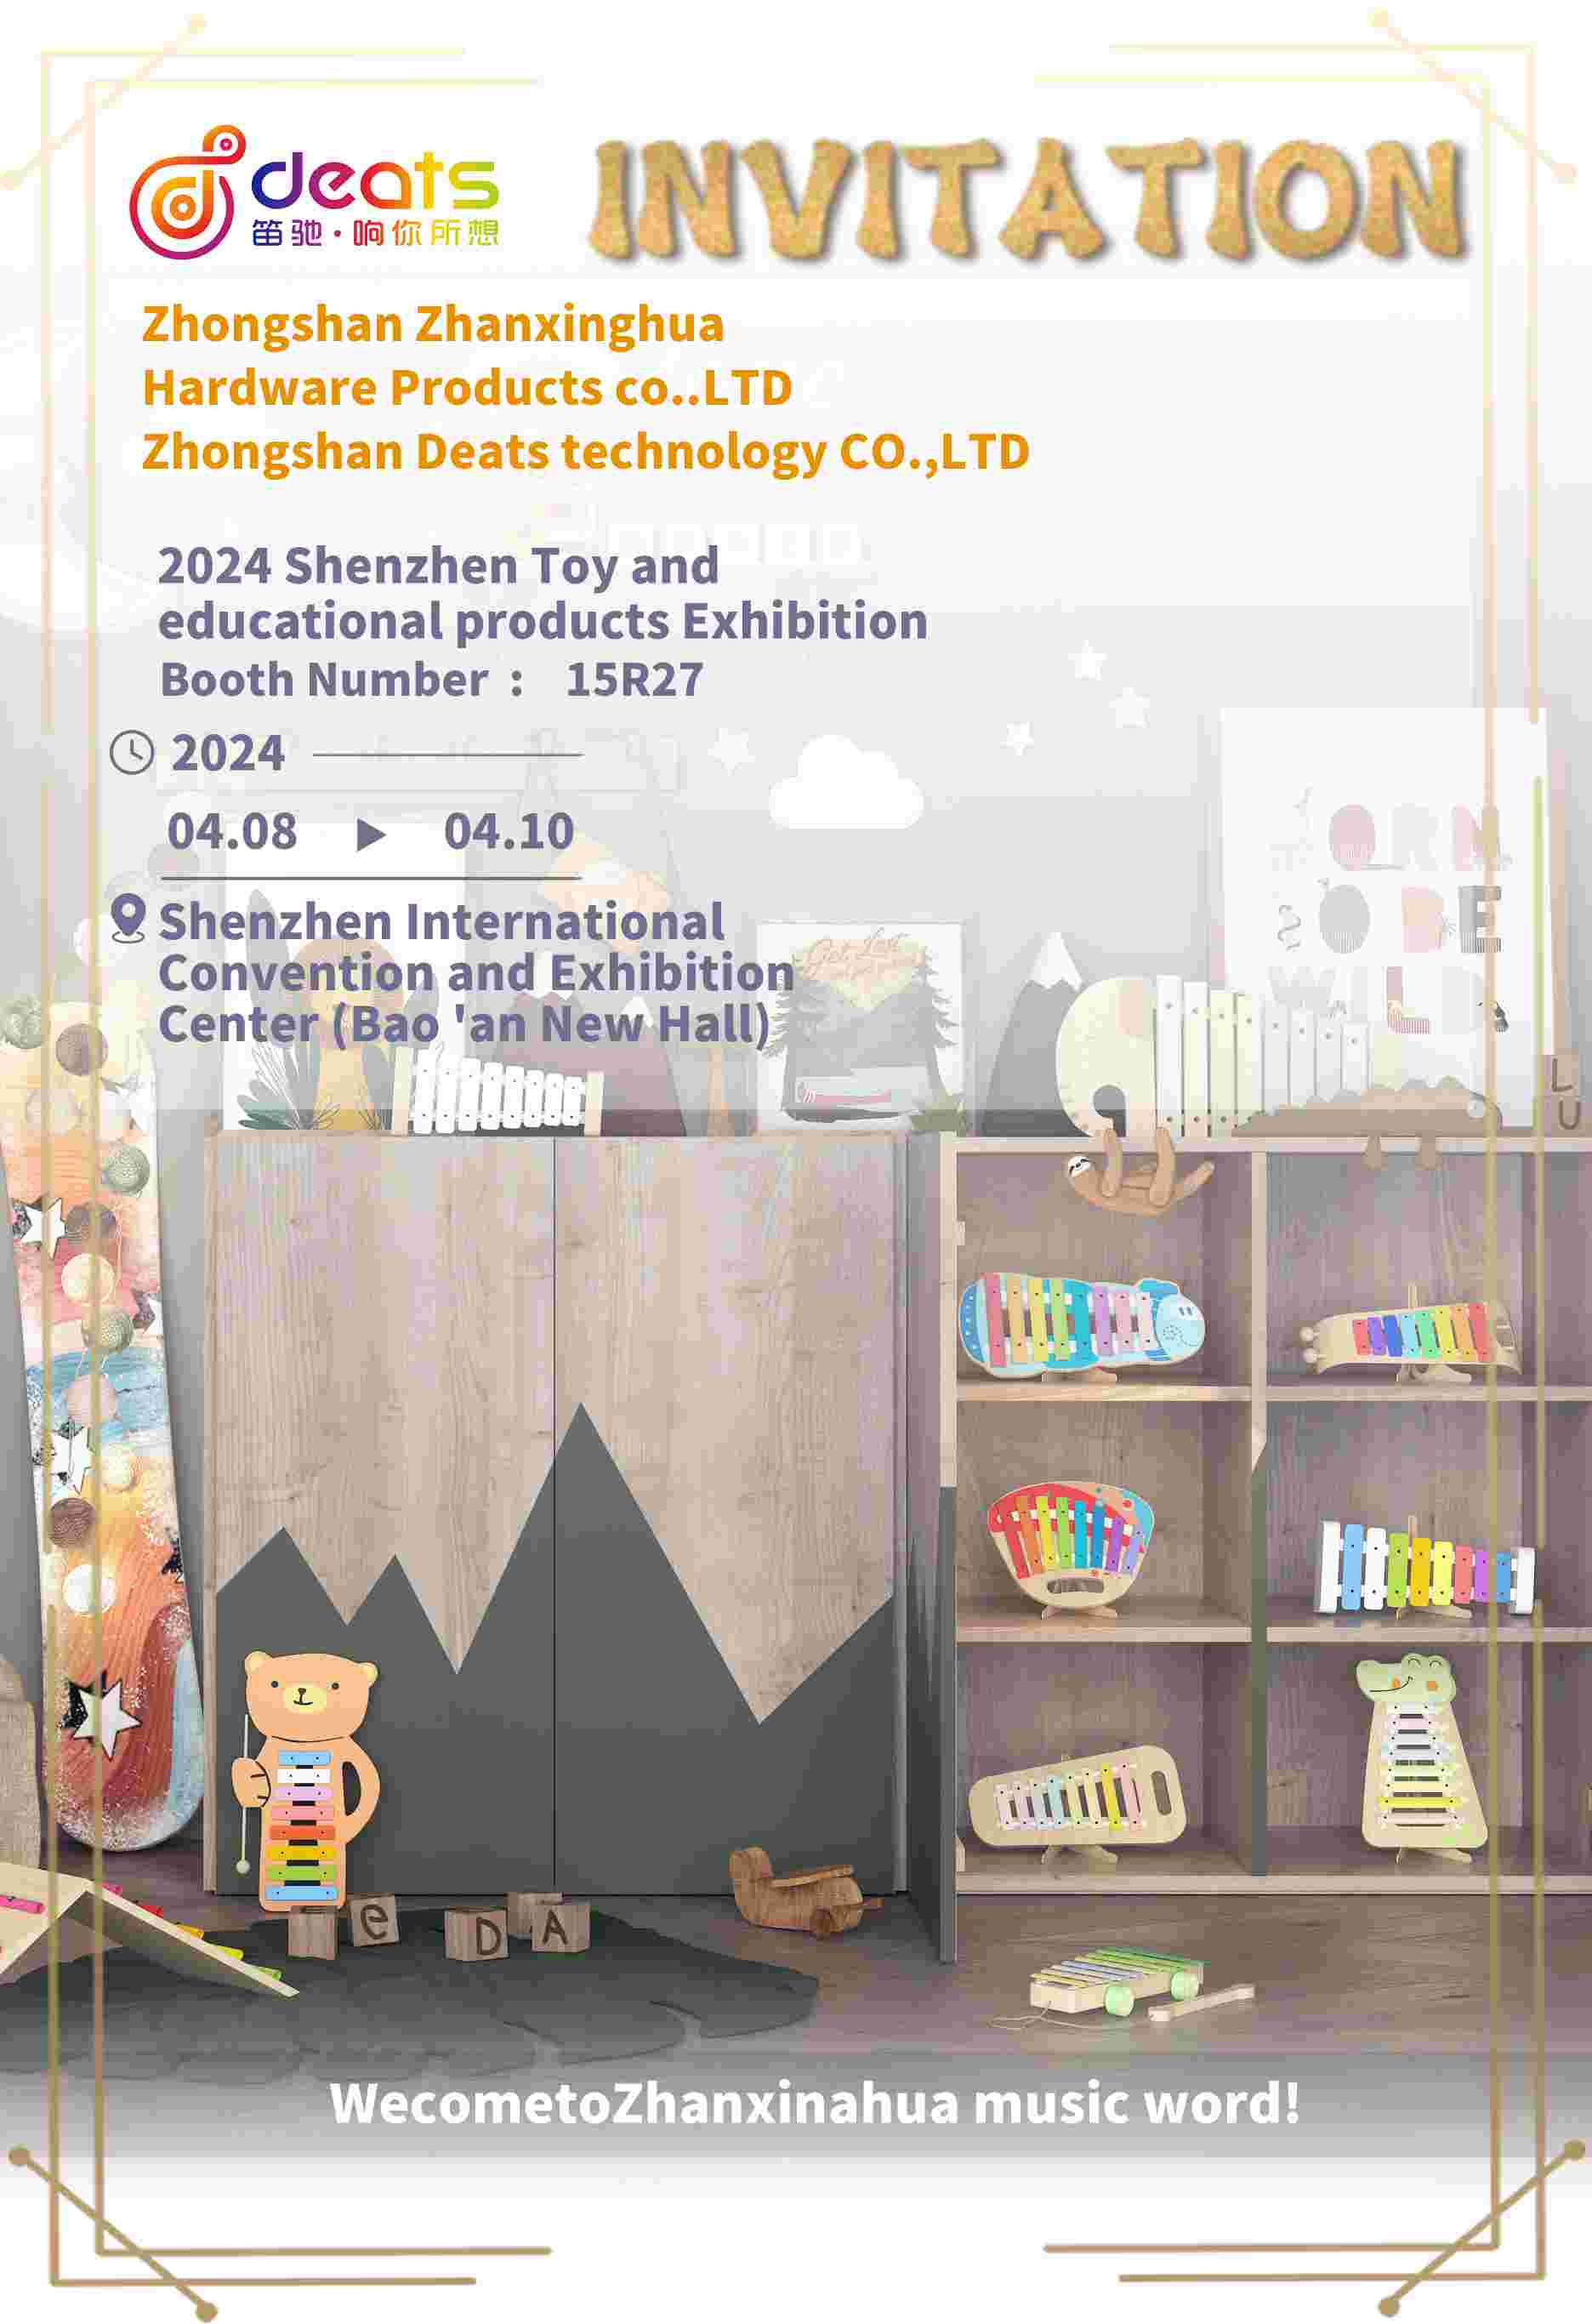 Shenzhen Toy and educational products Exhibition 